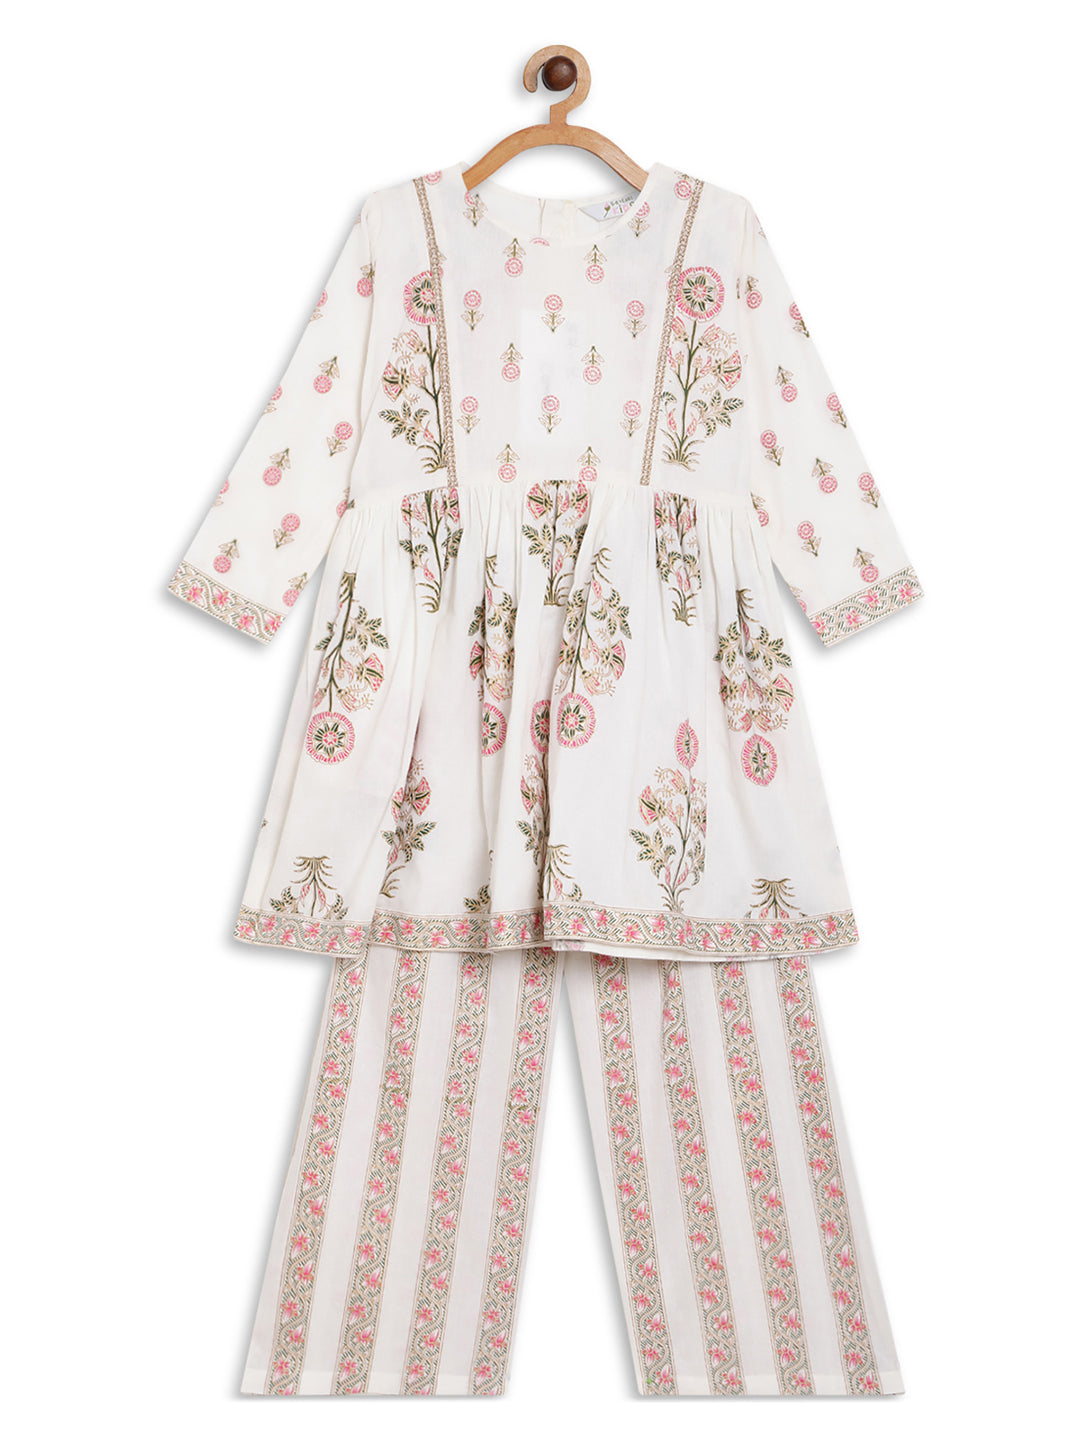 Off White Floral Printed Pure Cotton Girls Kurta with Palazzos